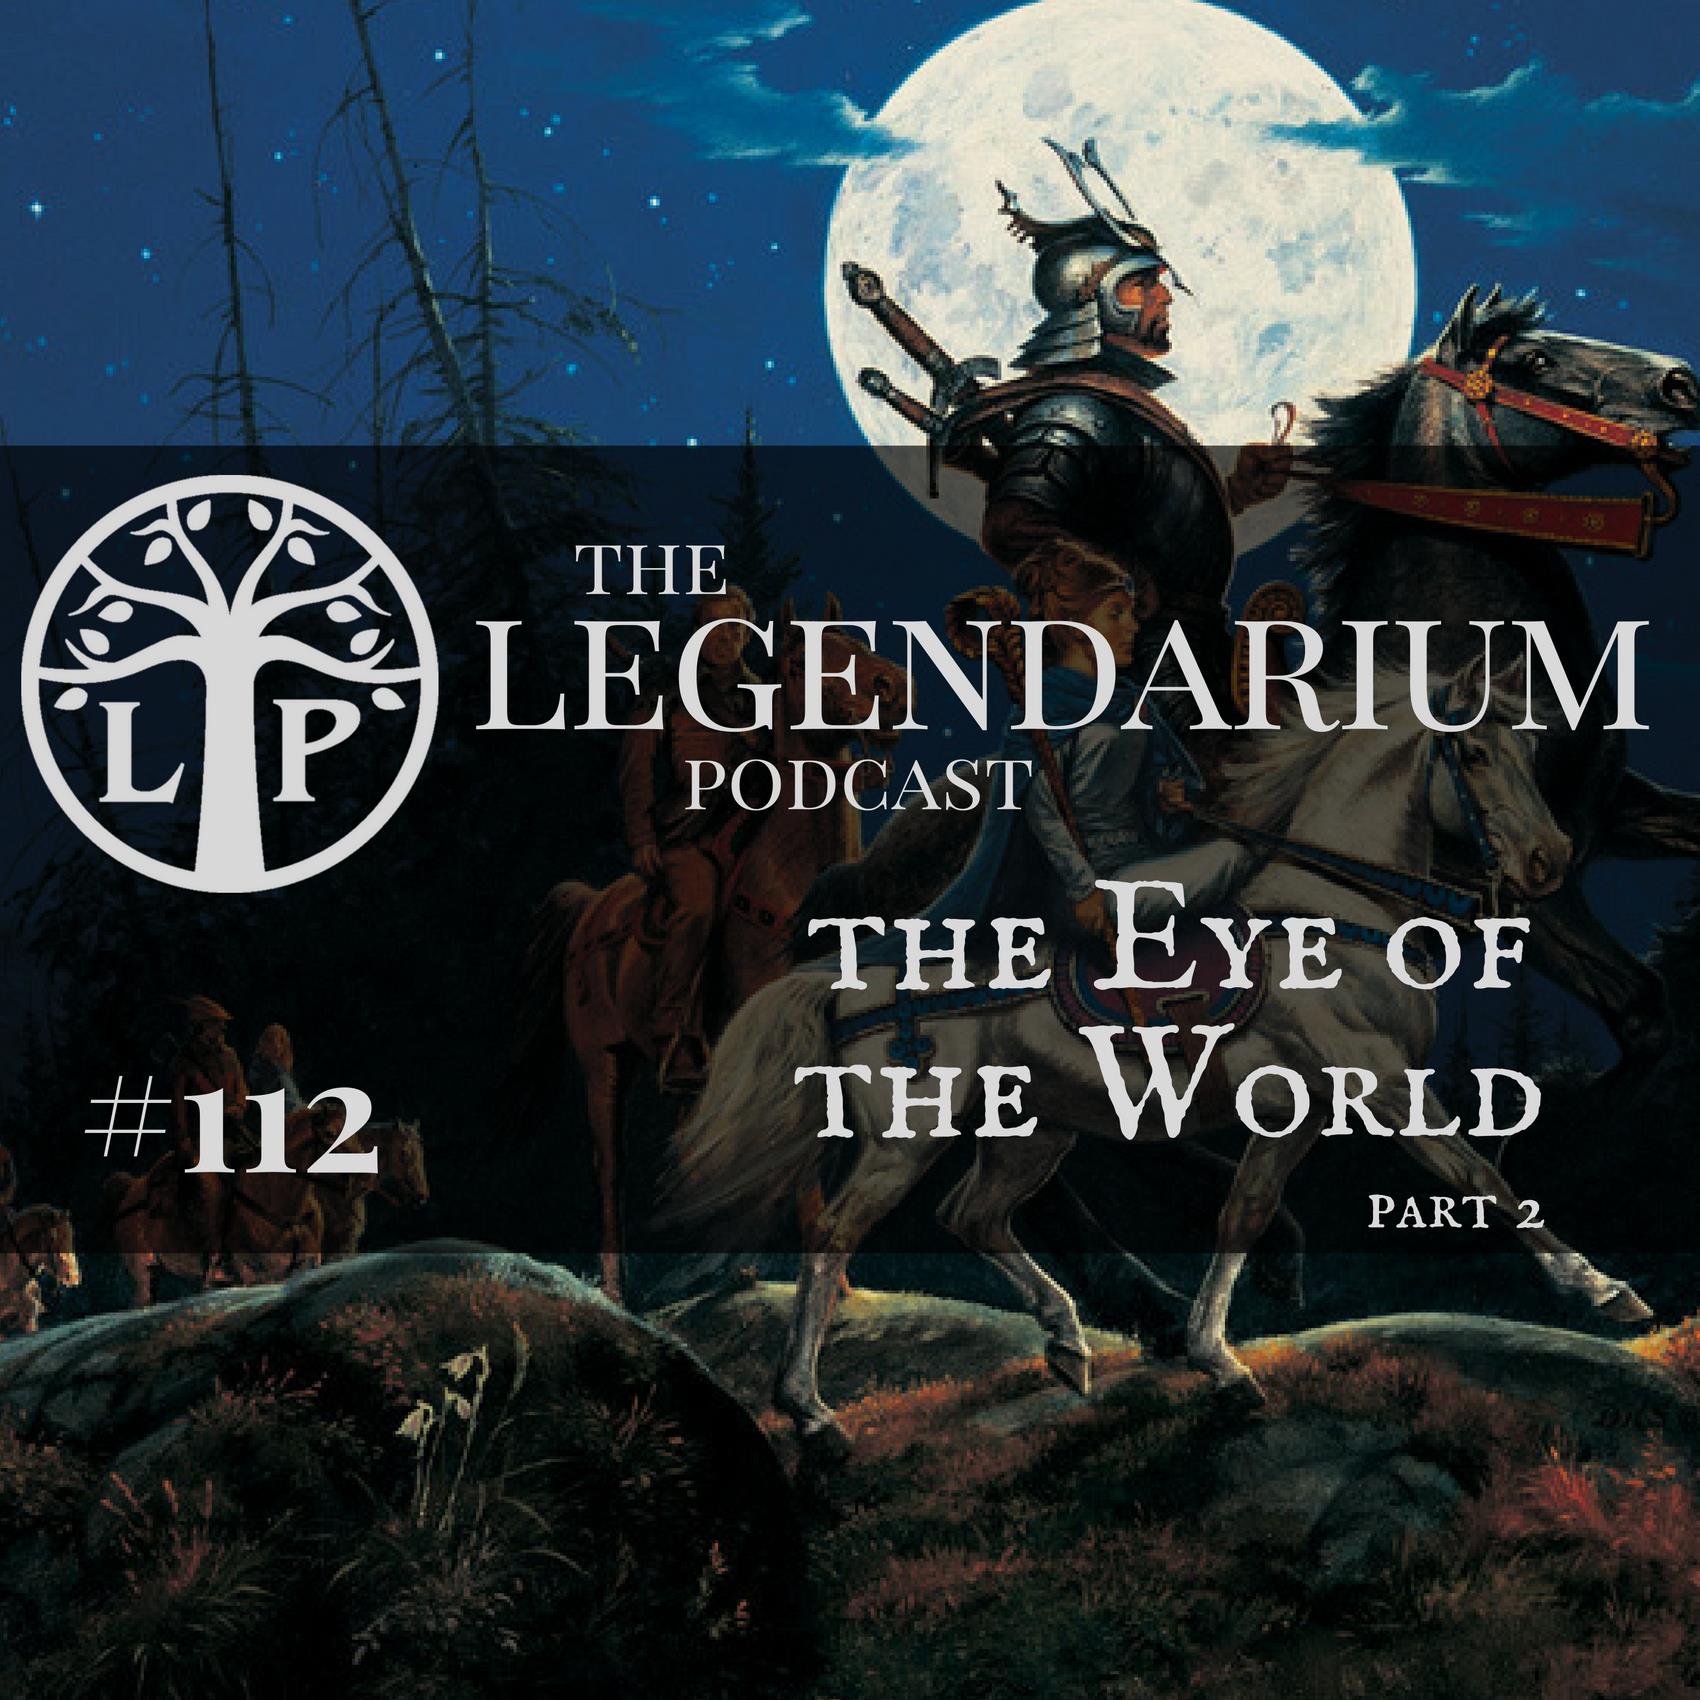 #112. The Eye of the World, part 2